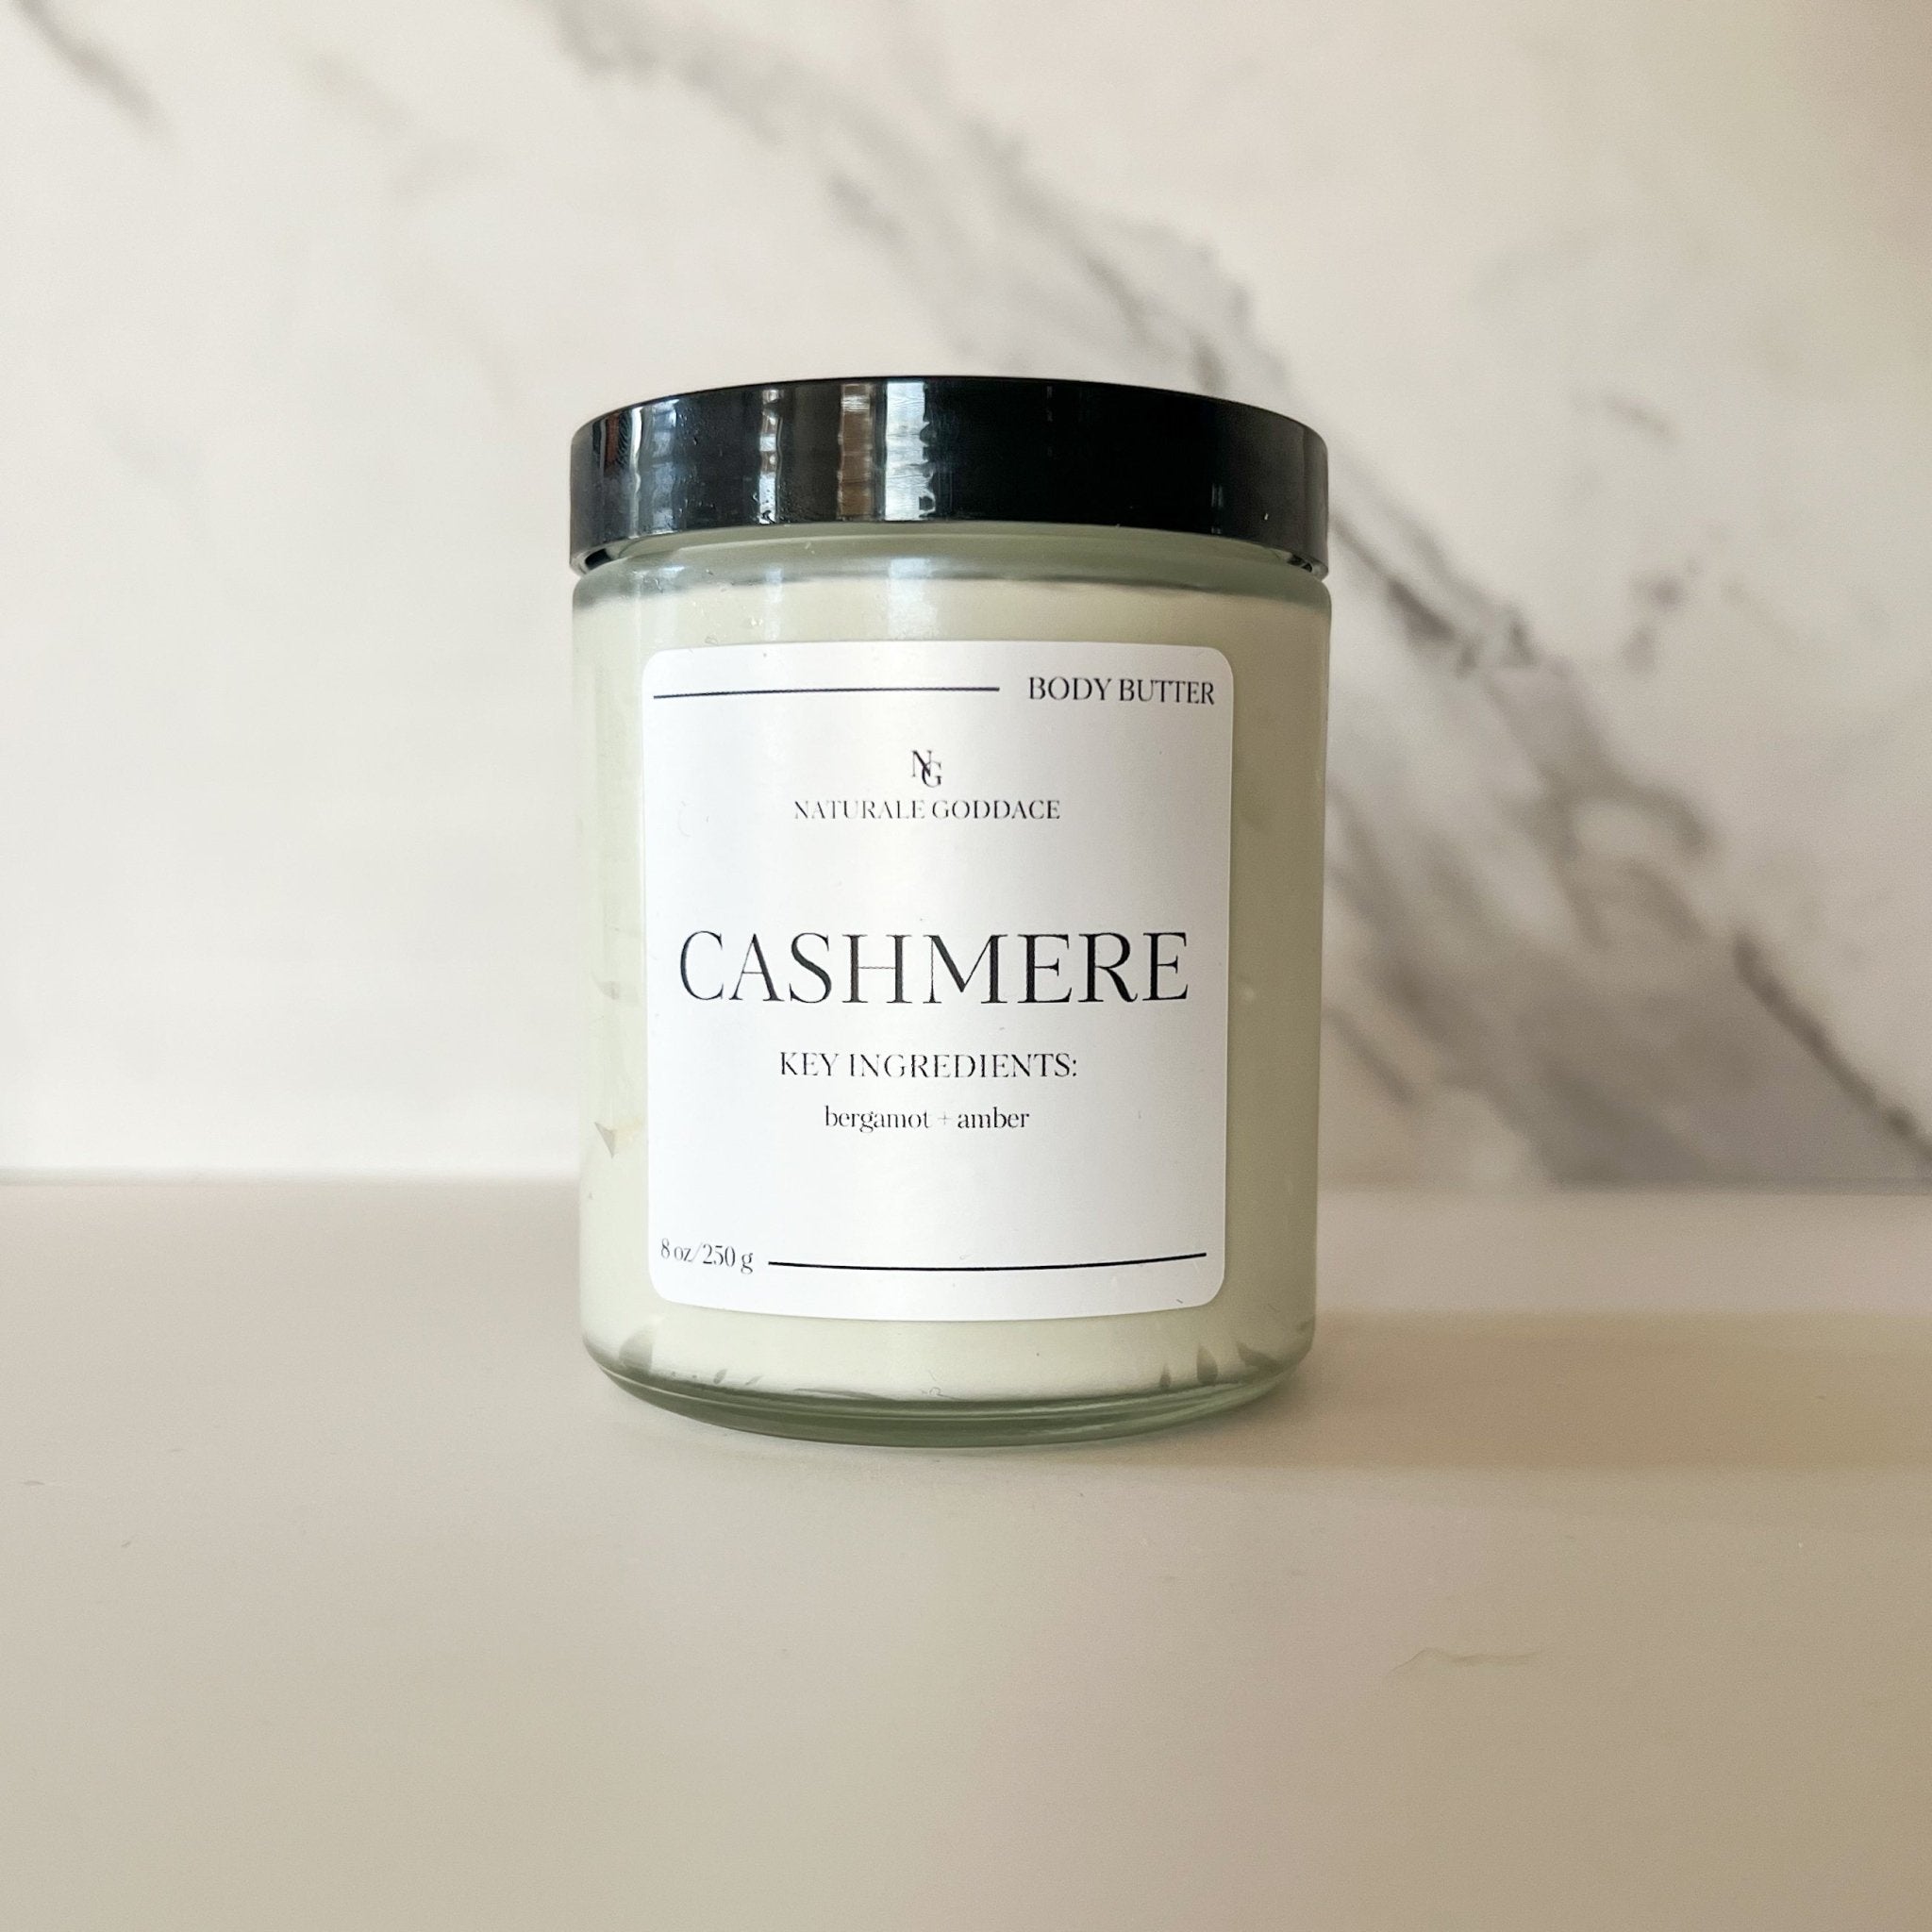 Cashmere Body Butter - Naturale Goddace | Clean + simple skincare-